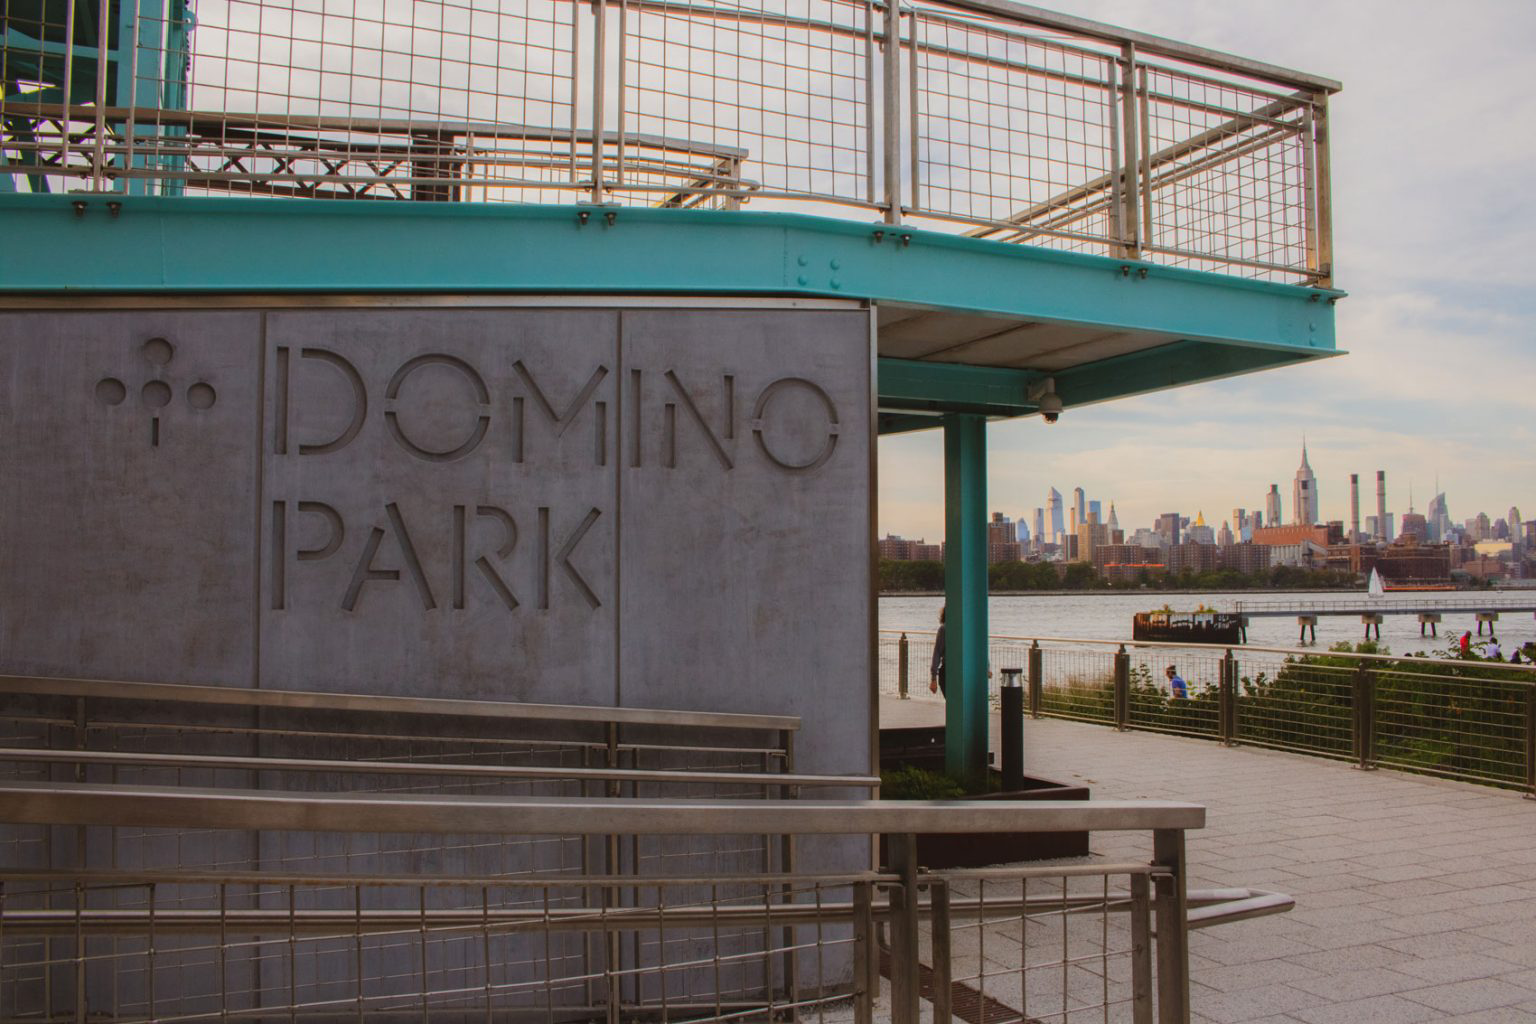 The large, concrete sign of Domino Park.